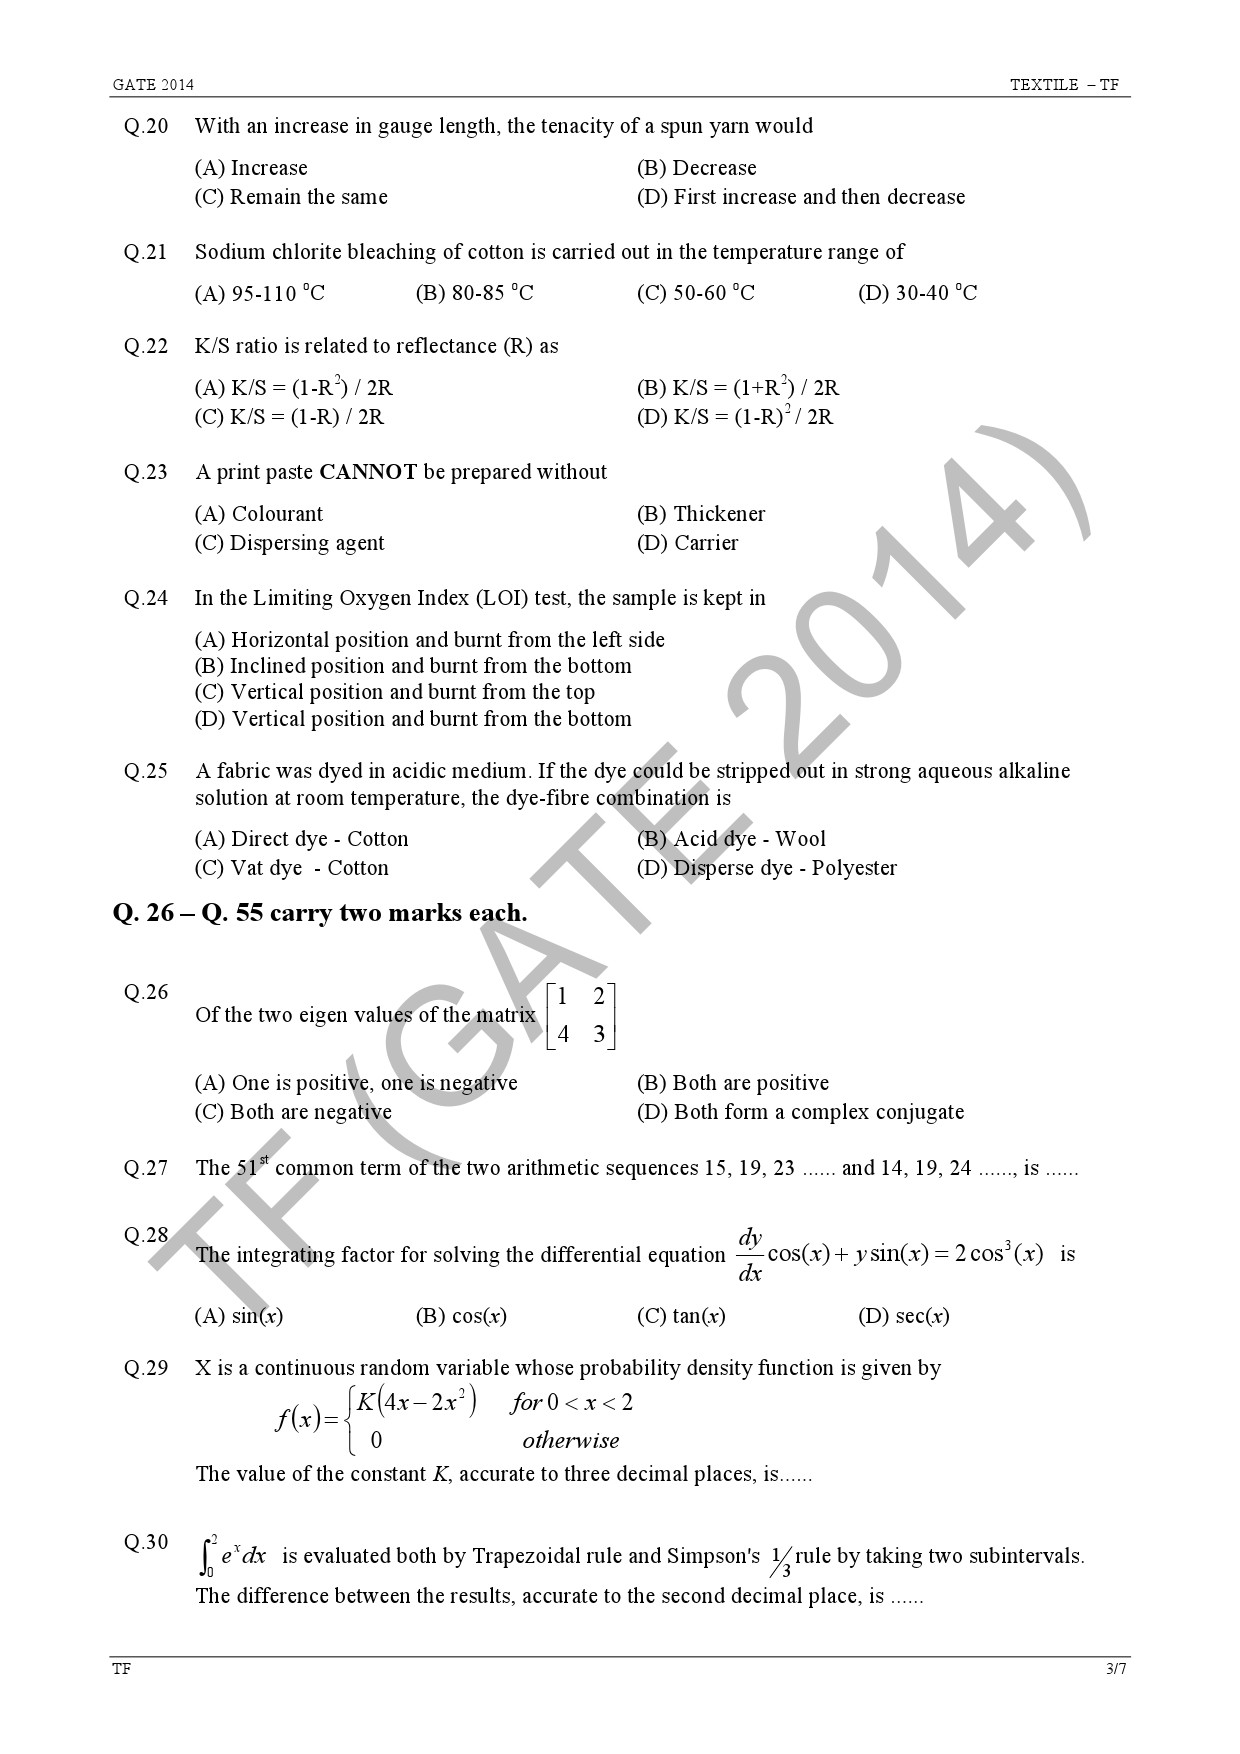 GATE Exam Question Paper 2014 Textile Engineering and Fibre Science 9